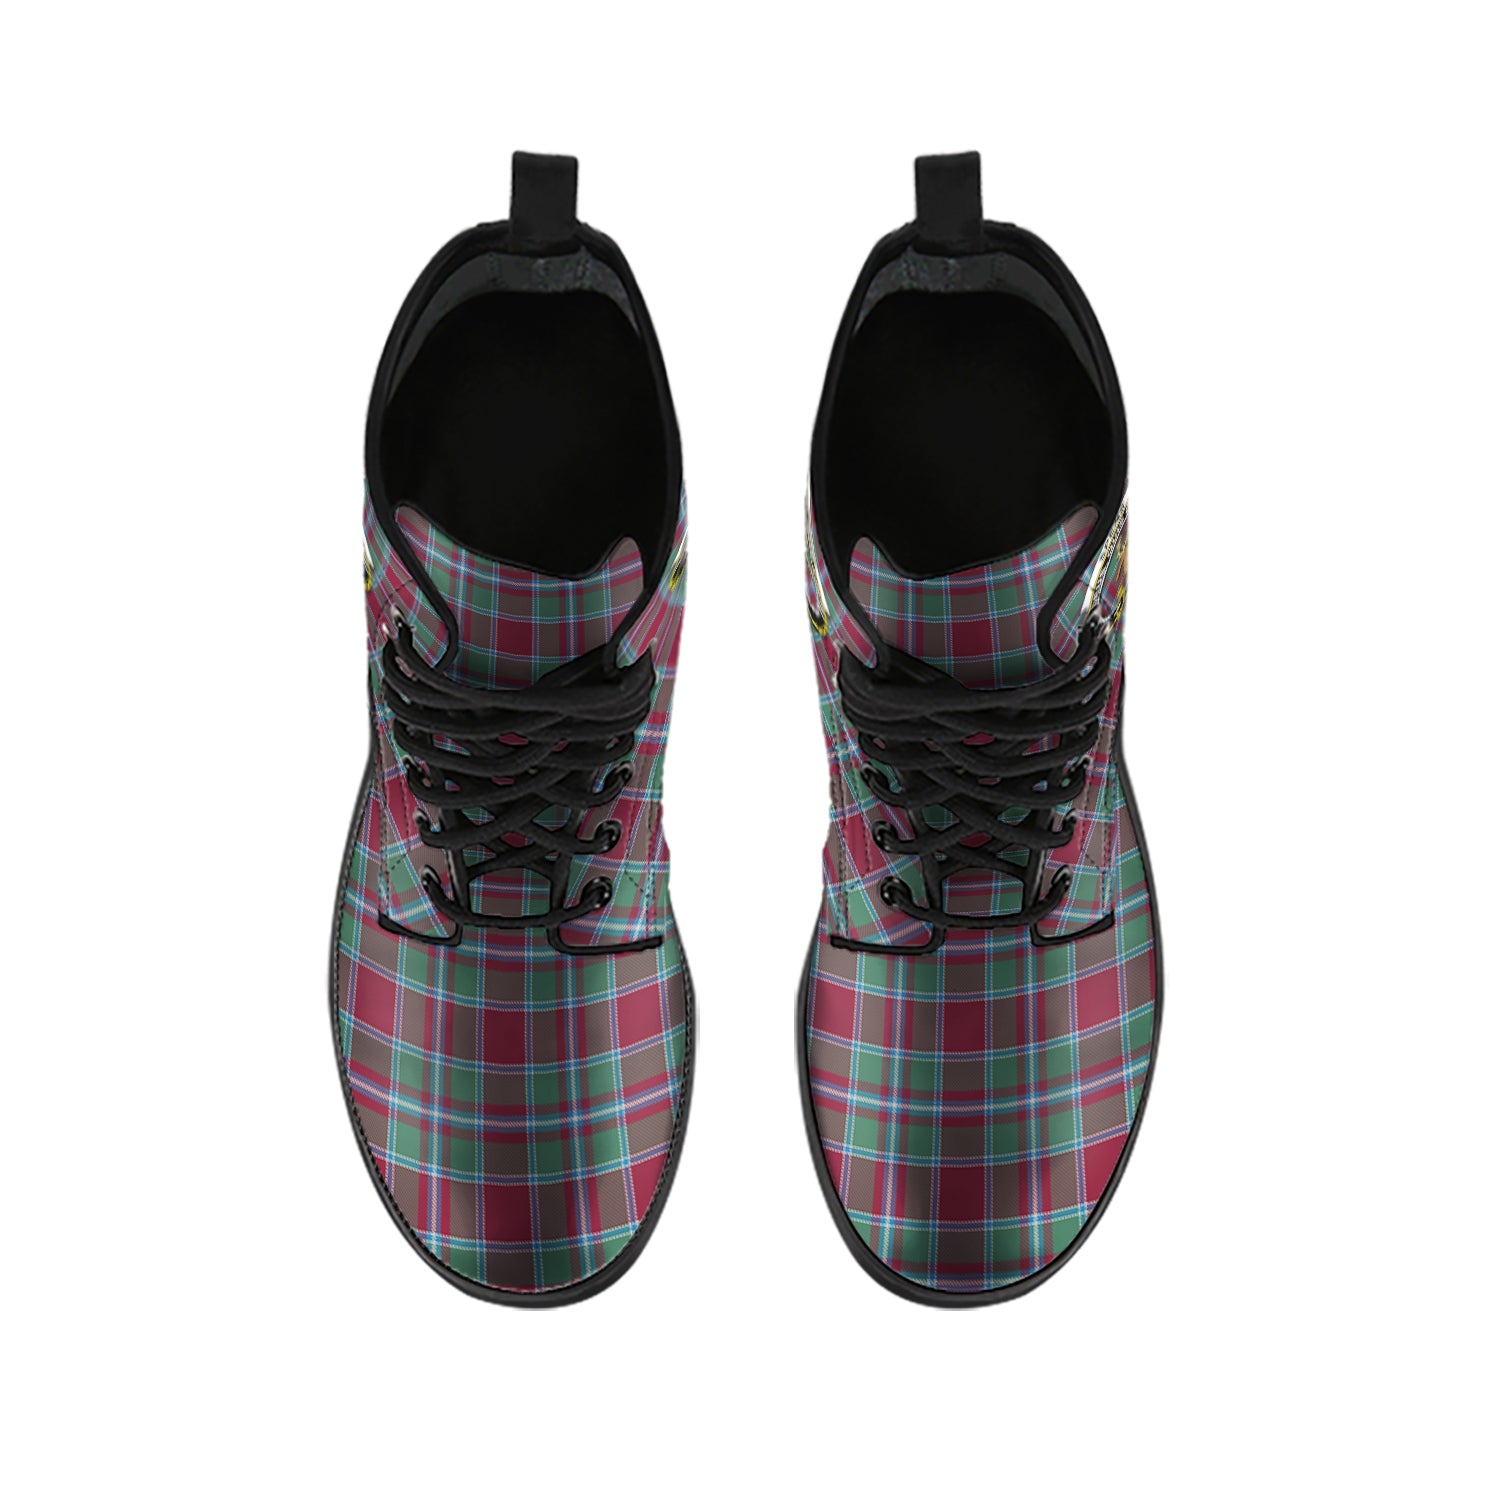 spens-spence-tartan-leather-boots-with-family-crest